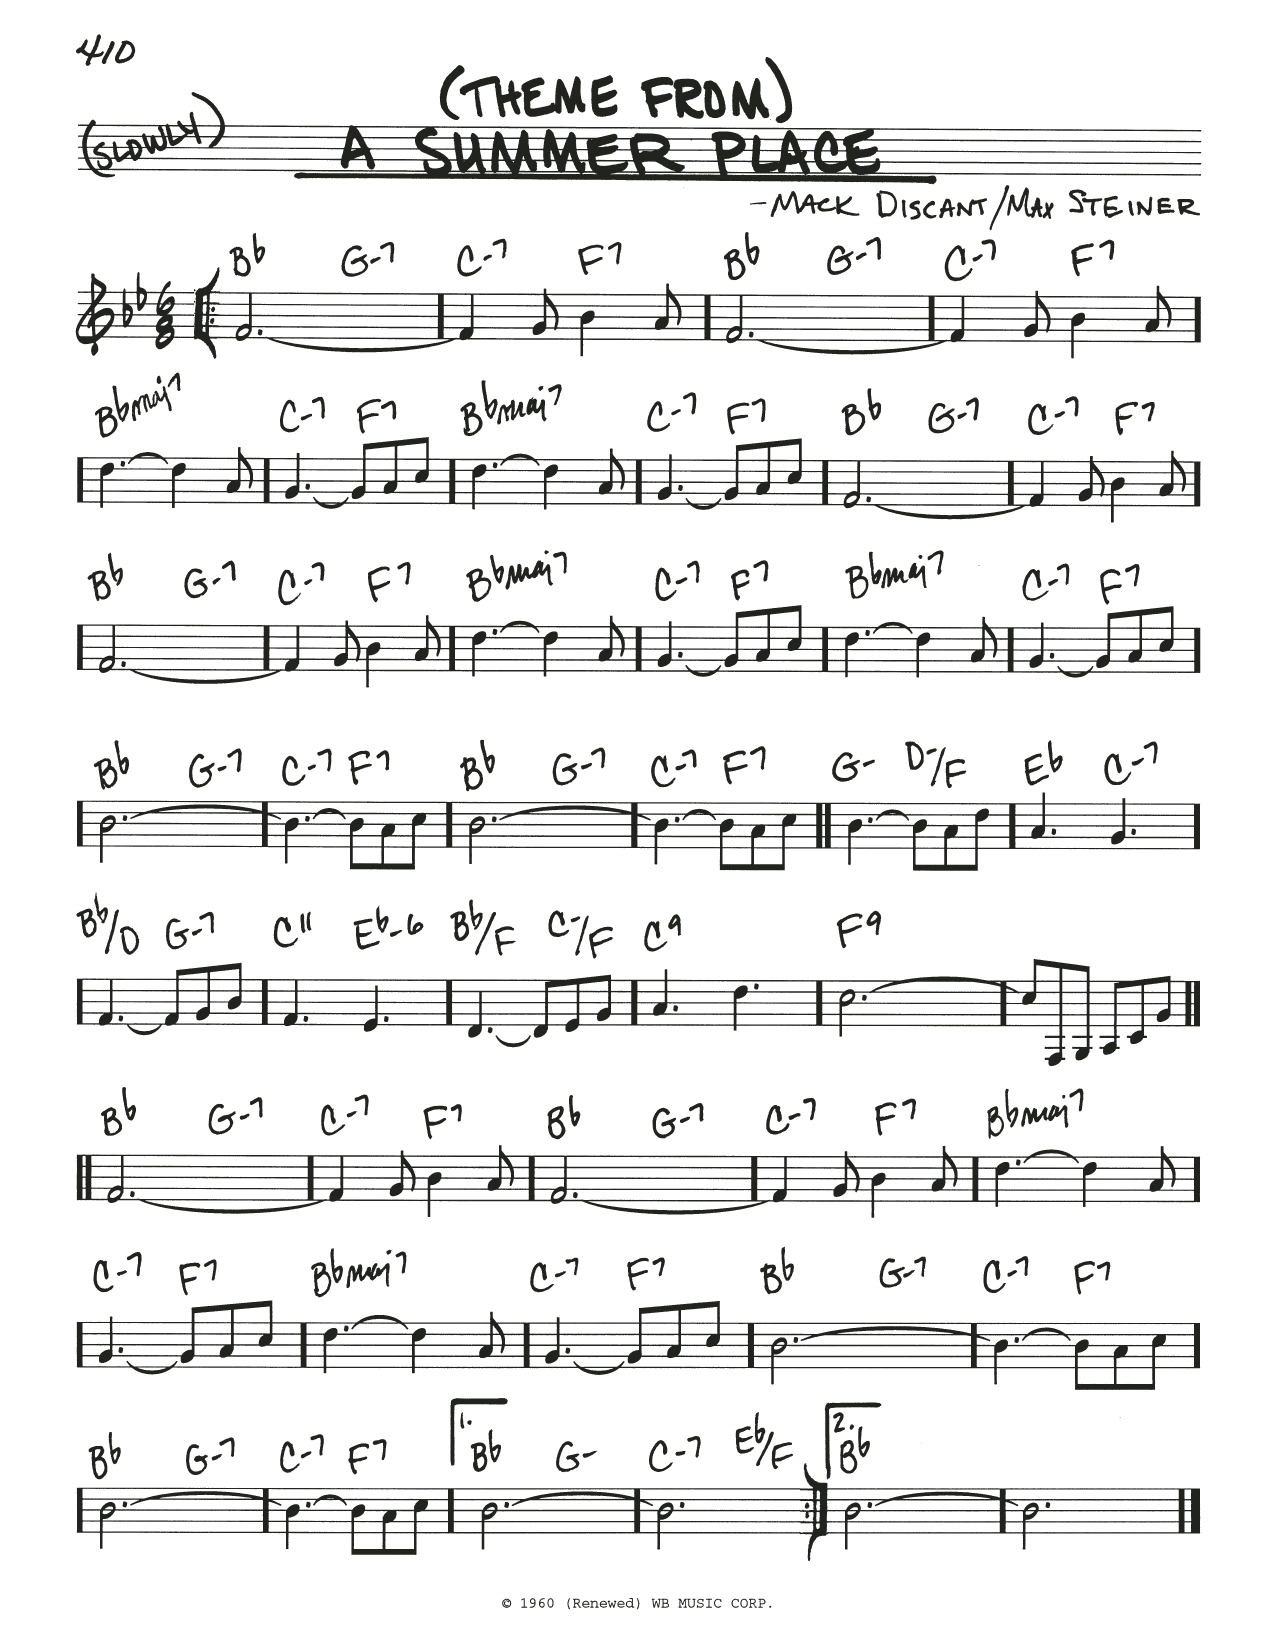 Download Mack Discant (Theme From) A Summer Place Sheet Music